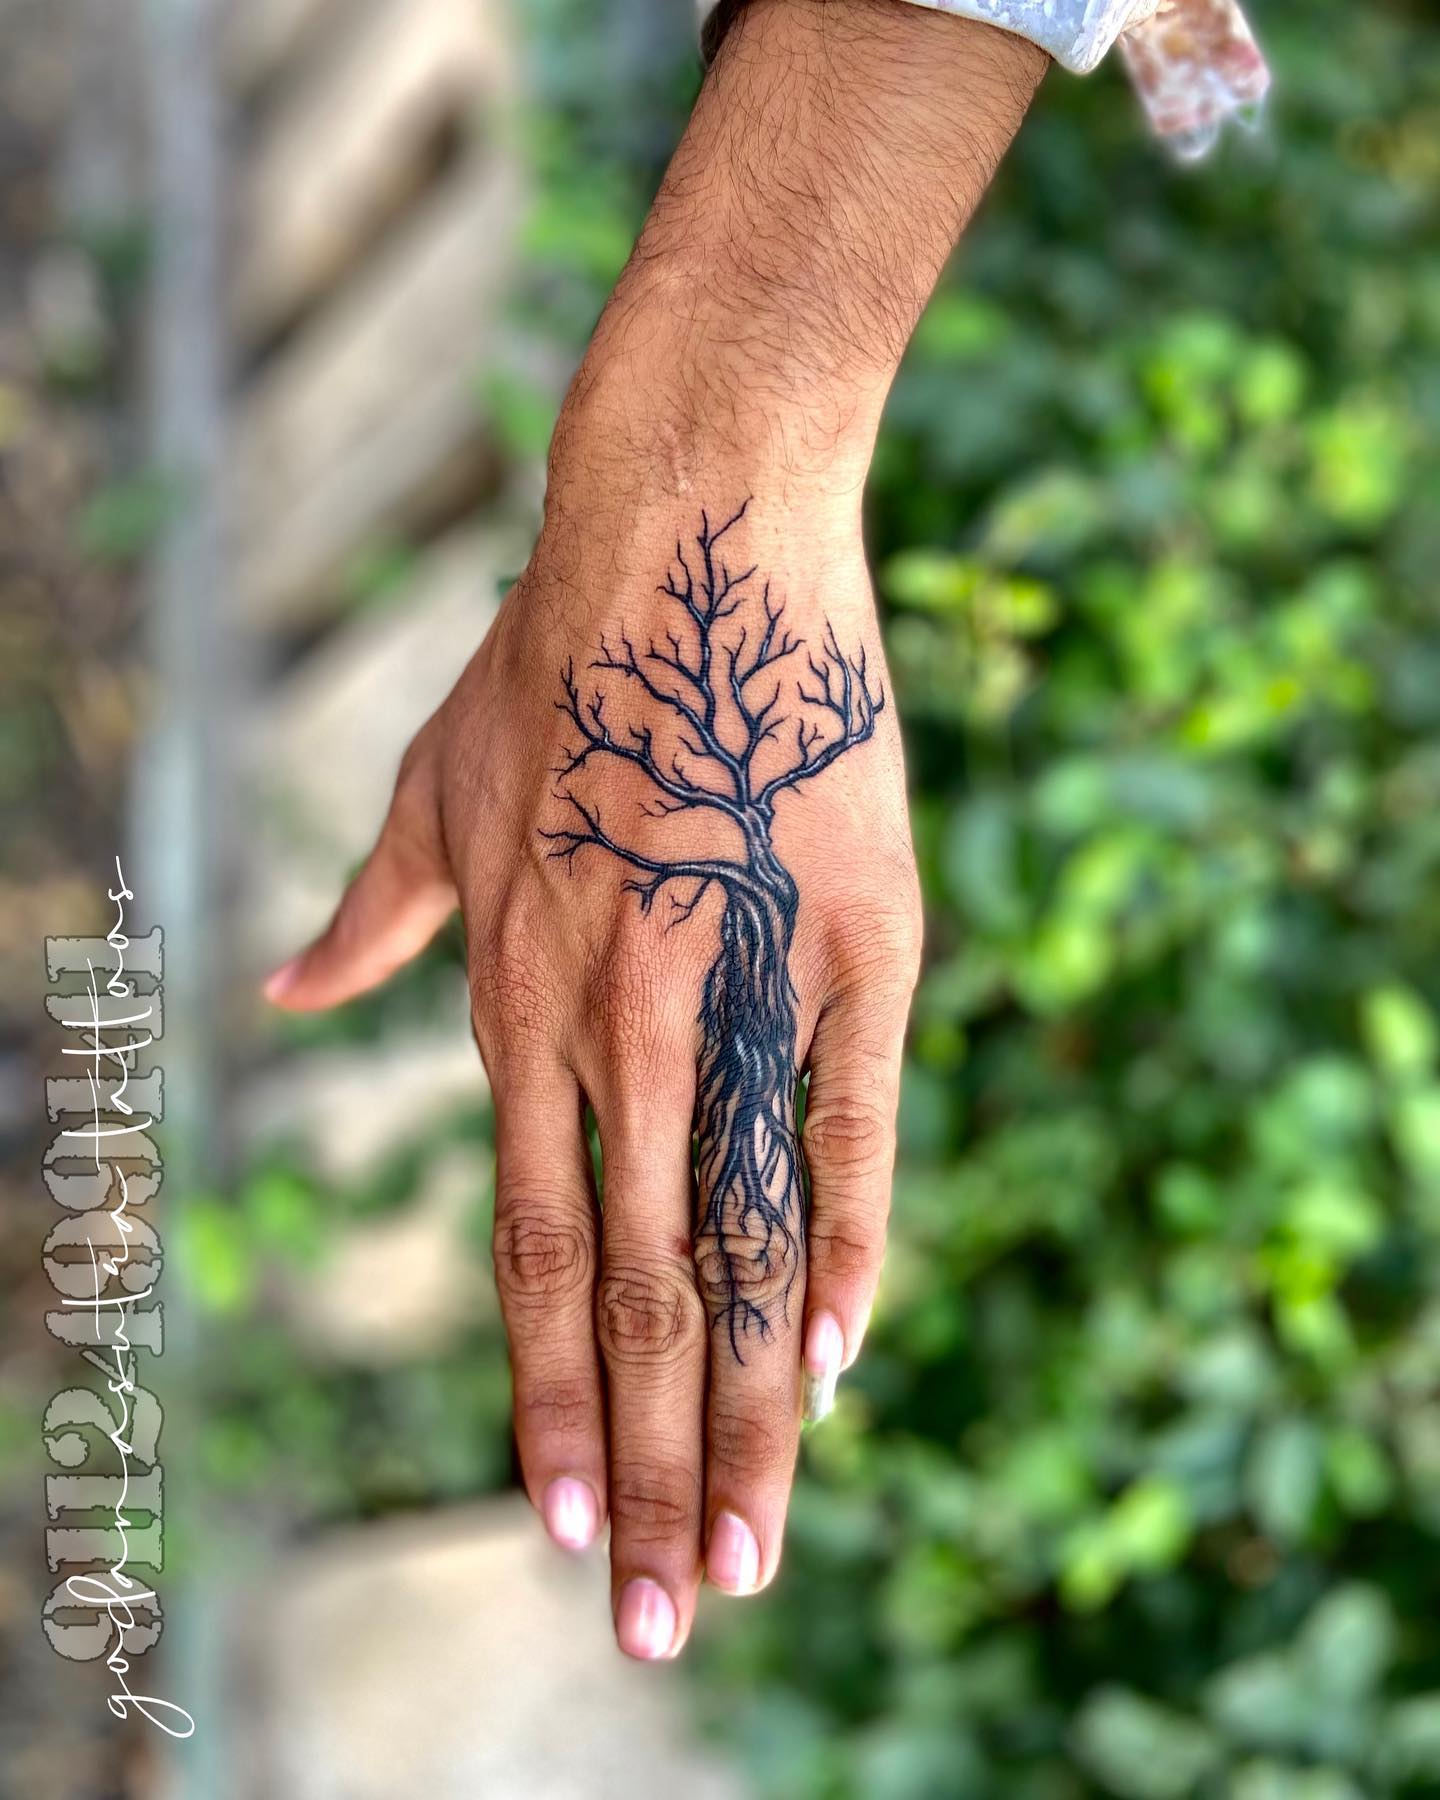 A little 3 in 1 tattoo I made to my finger a tree a thunder and veins   rsticknpokes